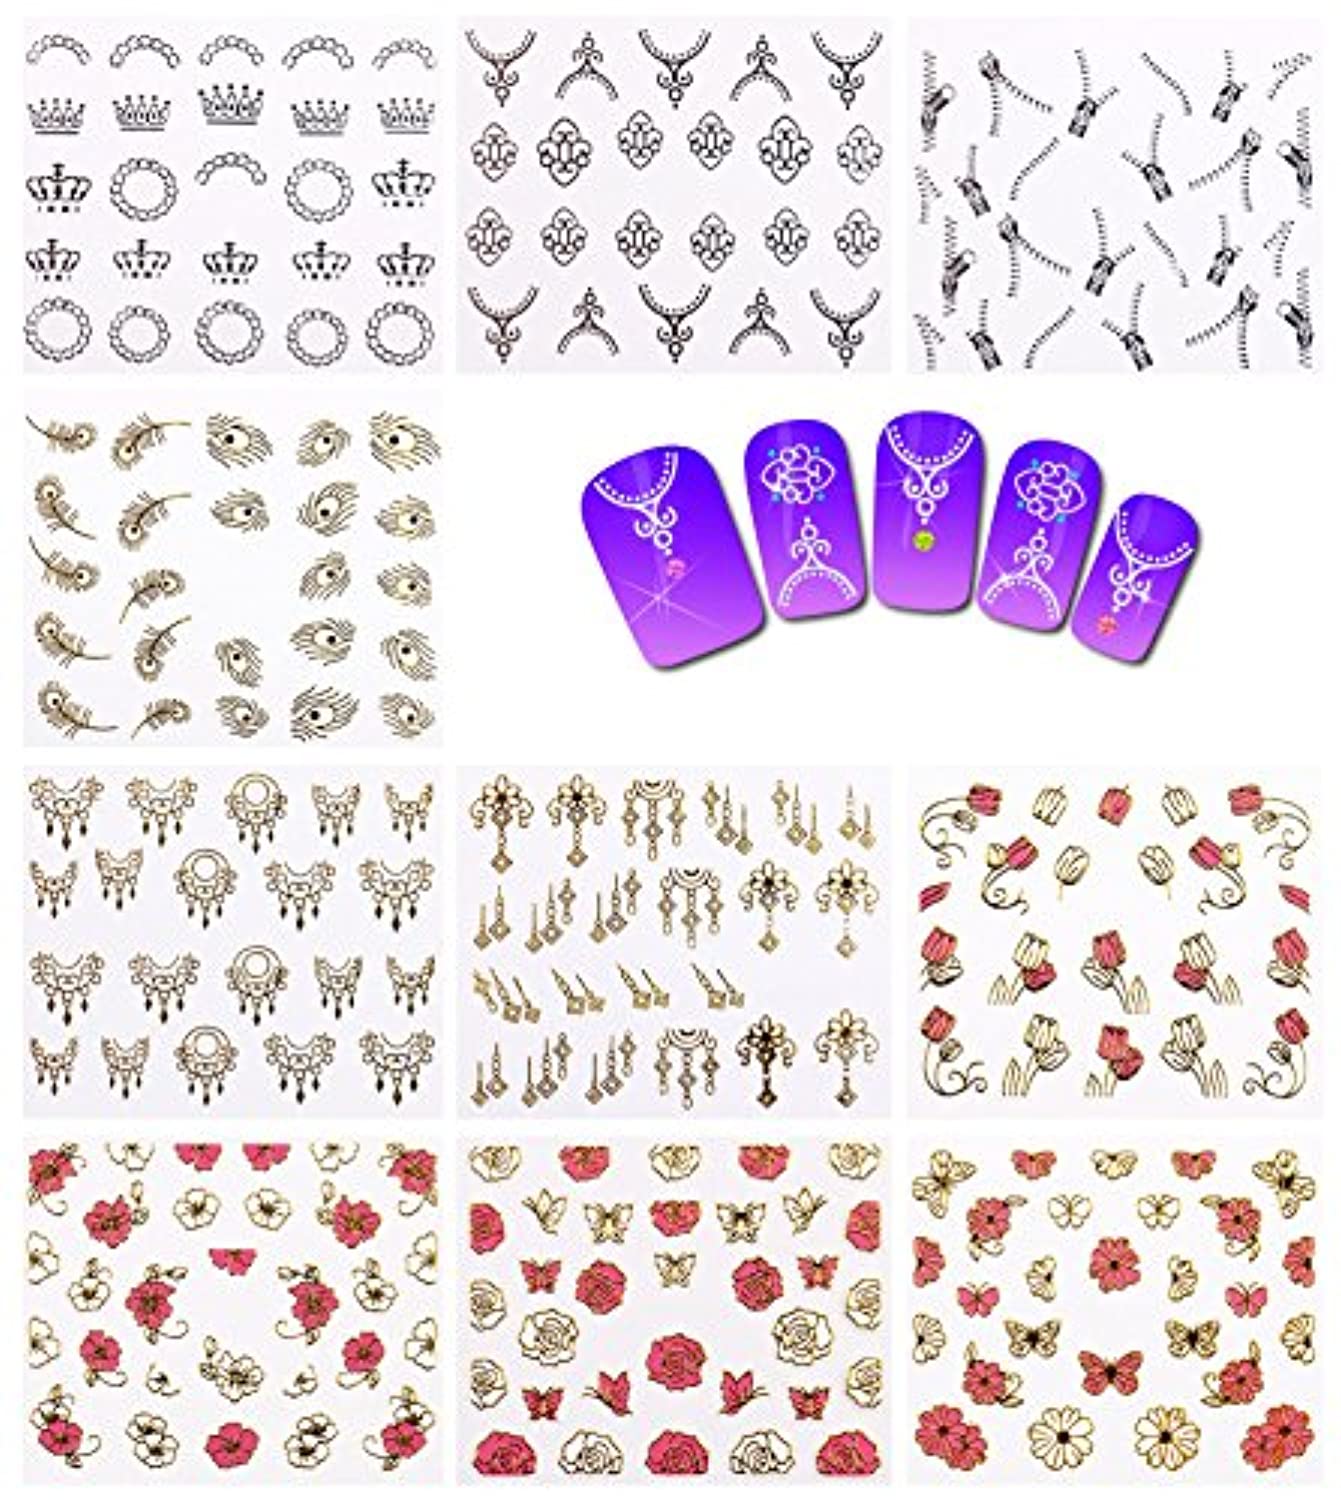 NiceDeco 50 Sheets 3D Design Self-Adhesive Tip Nail Stickers Nail Art Tattoo Nail Decals DIY Nail Art Decoration Flower/Butterfly/Fishes/Stars/Cat/Halloween Skull/Moustache/Lace